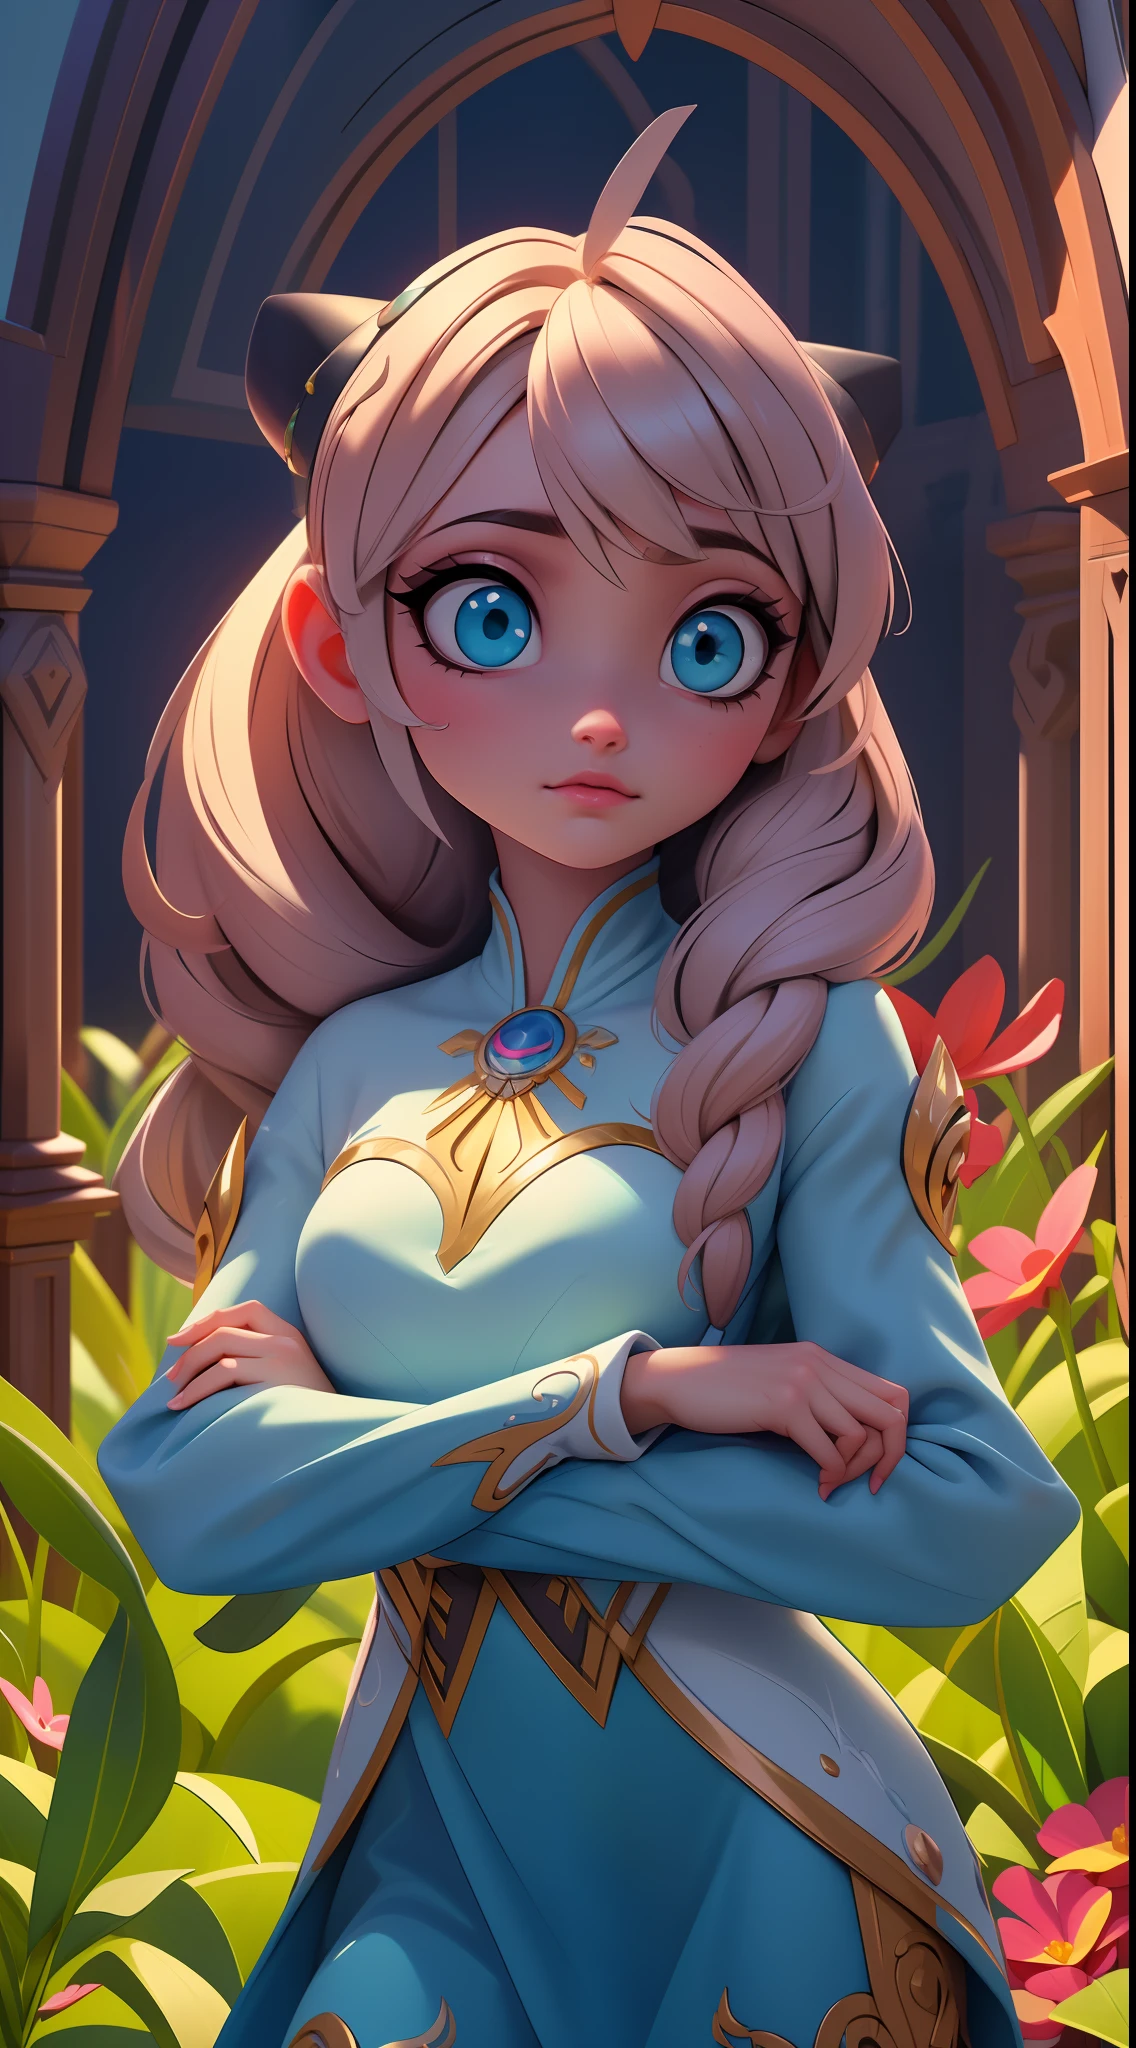 Elsa-Anya Fusion, Merging models, melting, Wearing Anya&#39;s clothes, Inside the house, 1girl, Beautiful, Character, Woman, Female, (master part:1.2), (best qualityer:1.2), (独奏:1.2), ((struggling pose)), ((field of battle)), cinemactic, perfects eyes, perfect  skin, perfect lighting, sorrido, Lumiere, Farbe, texturized skin, detail, Beauthfull, wonder wonder wonder wonder wonder wonder wonder wonder wonder wonder wonder wonder wonder wonder wonder wonder wonder wonder wonder wonder wonder wonder wonder wonder wonder wonder wonder wonder wonder wonder wonder wonder, ultra detali, face perfect